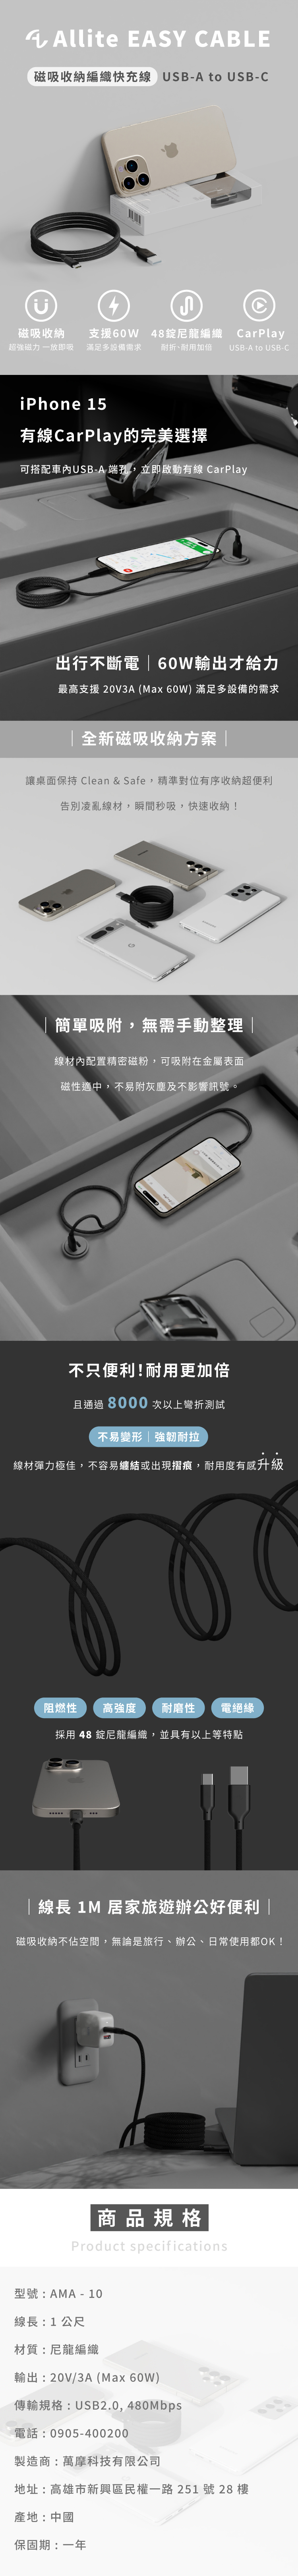 Allite EASY CABLE 磁吸收納編織快充線 USB-A to USB-C